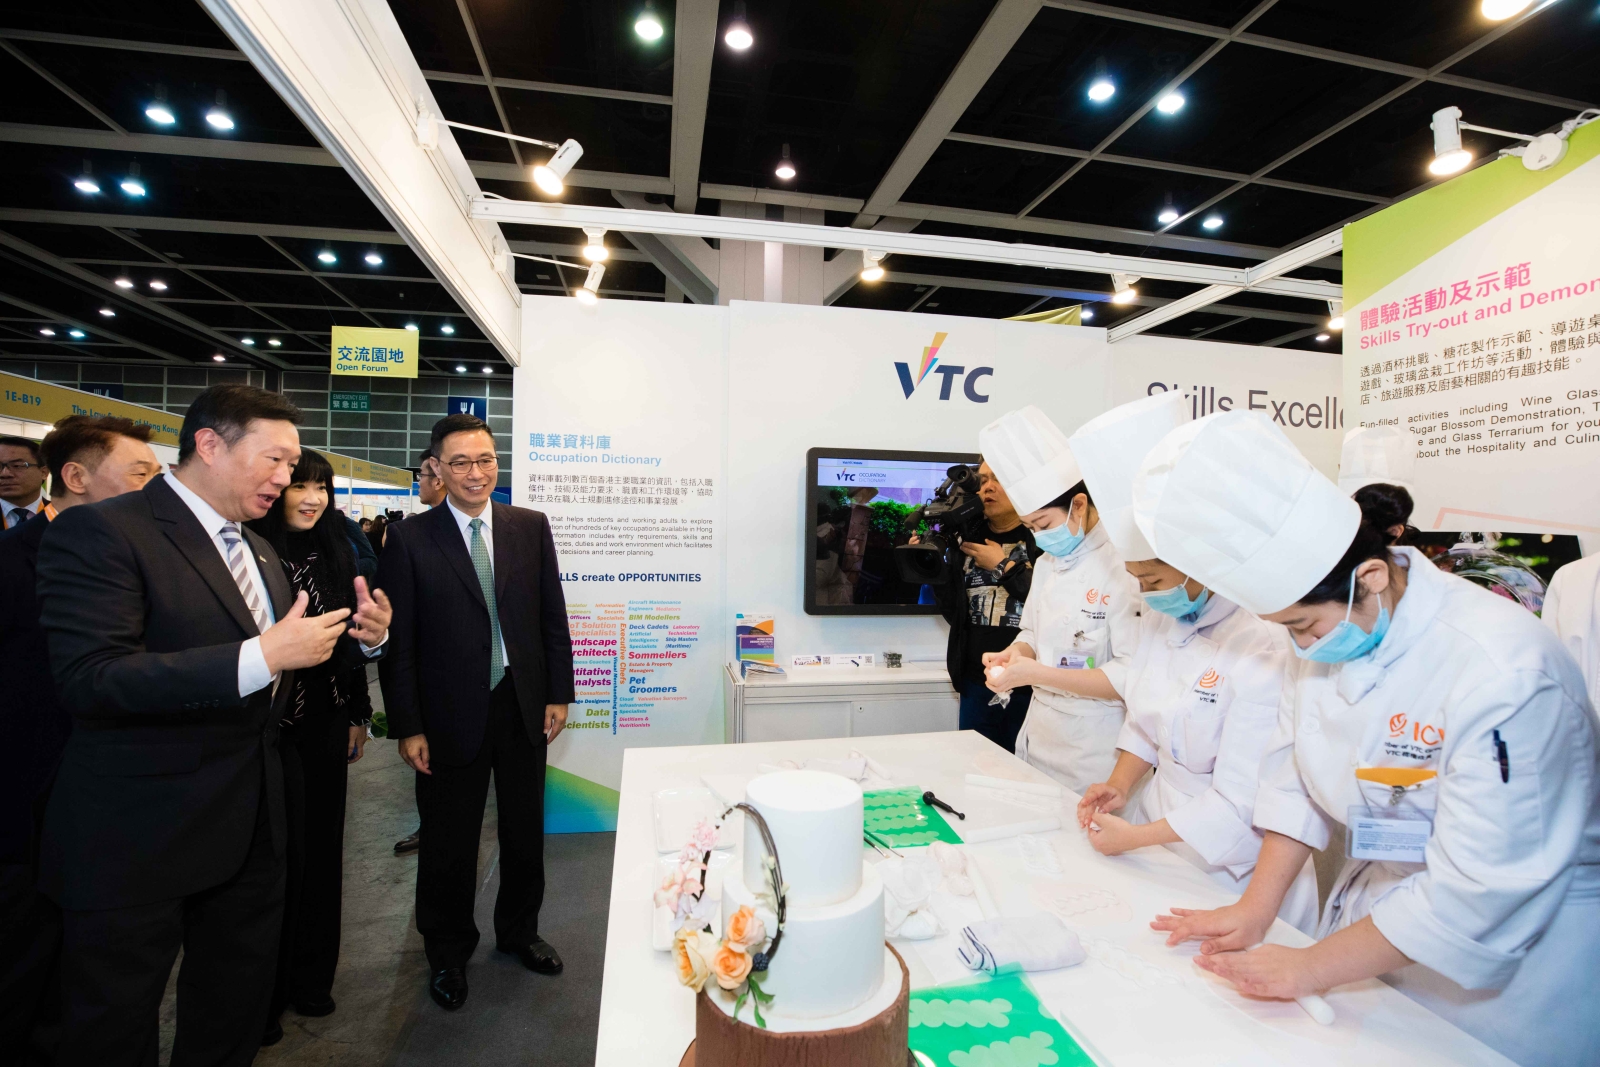 Secretary for Education Kevin YEUNG (third from left) tours the VTC Booth, talking to students and teachers to learn about the latest VPET developments